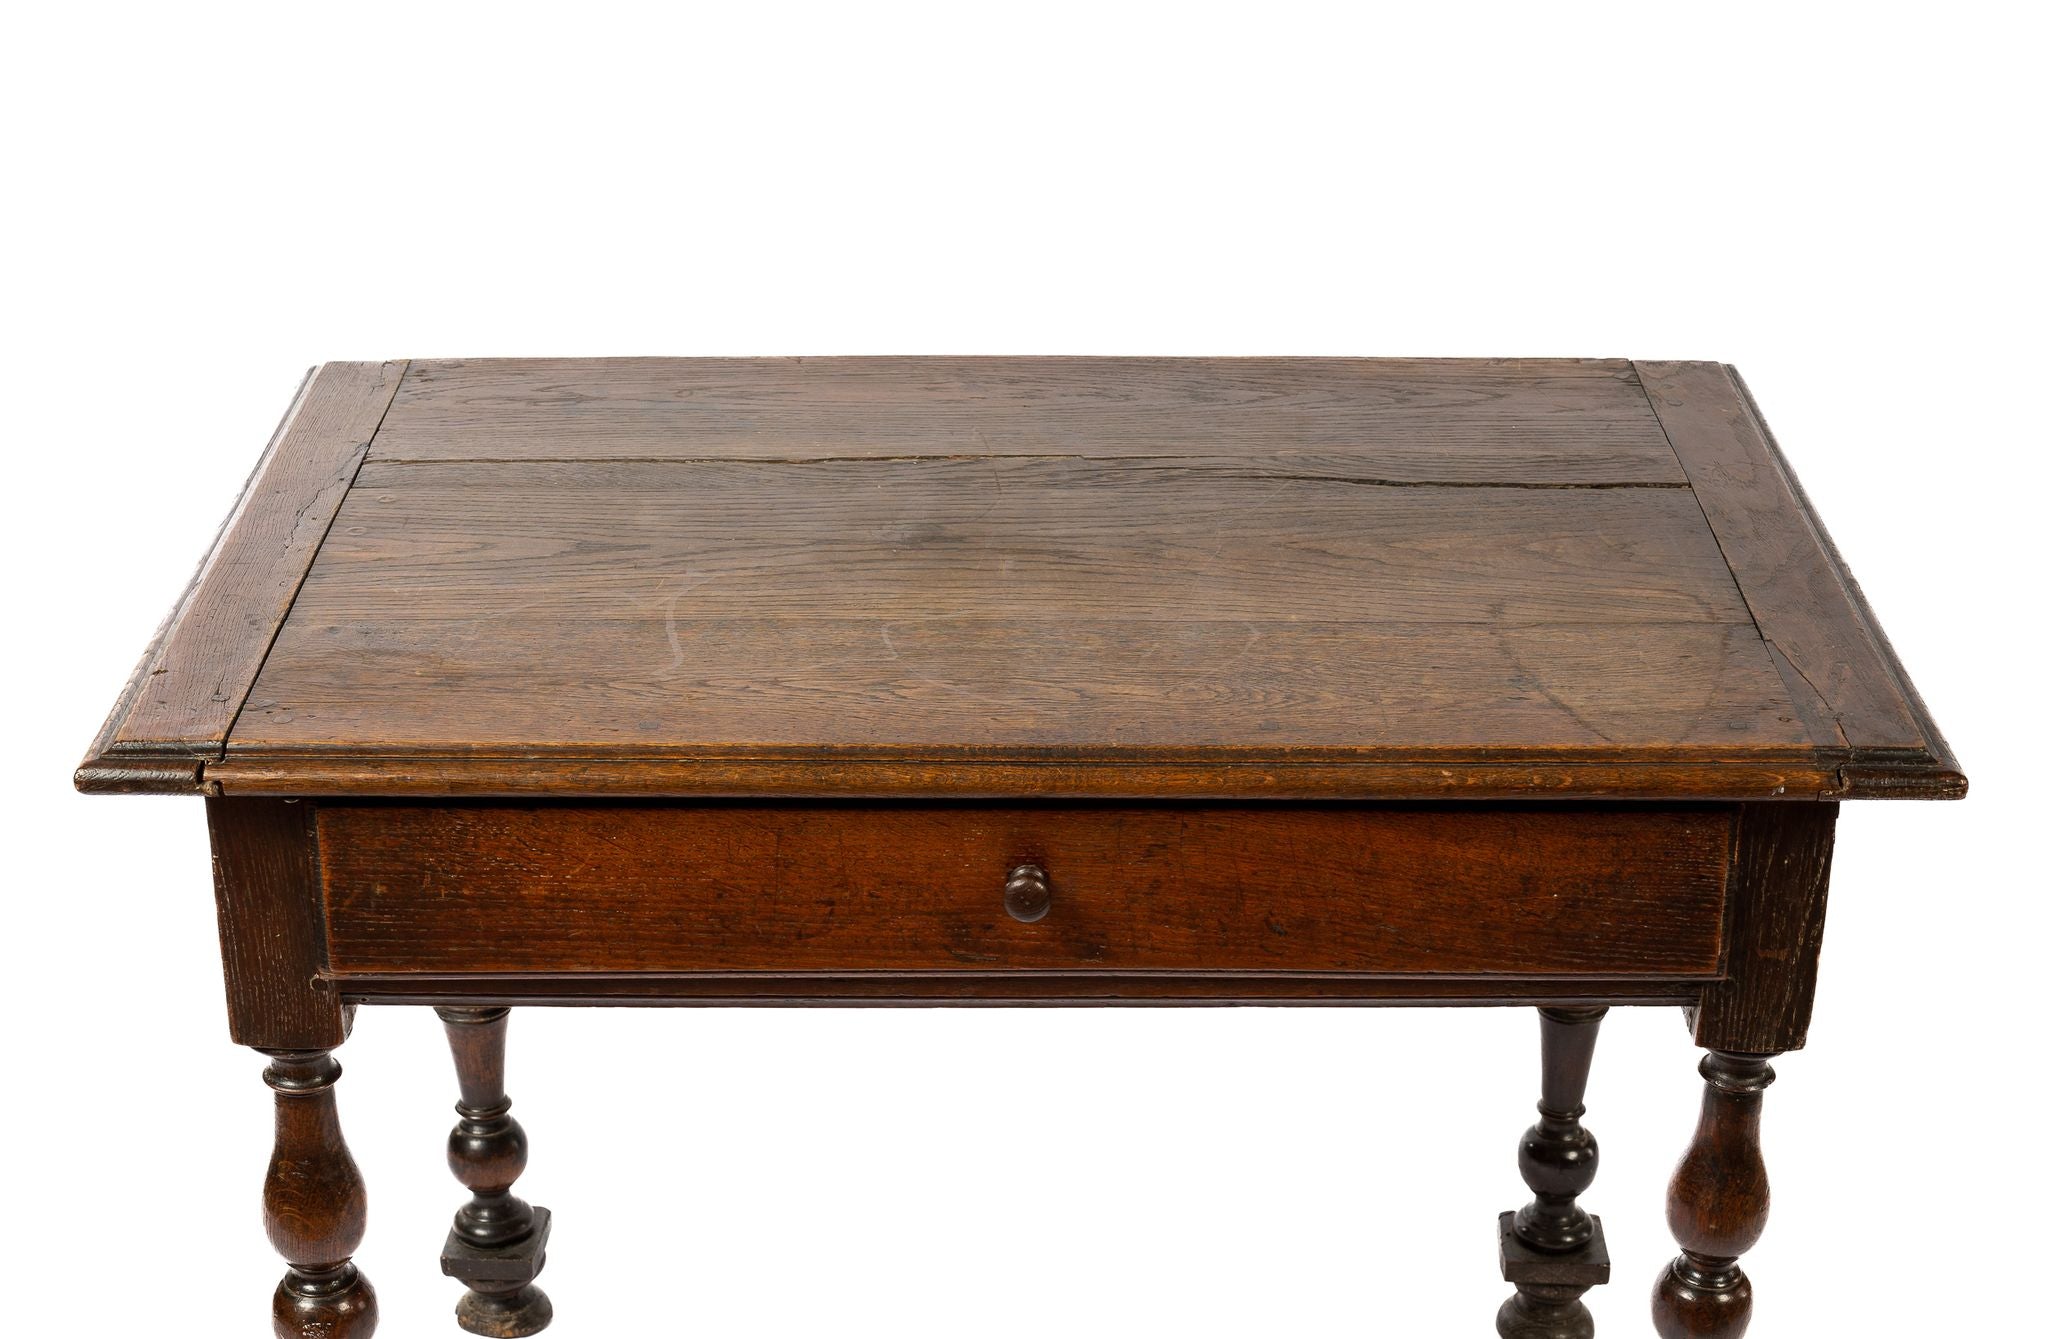 19th century antique French oak rustic side table/desk from the French Alps